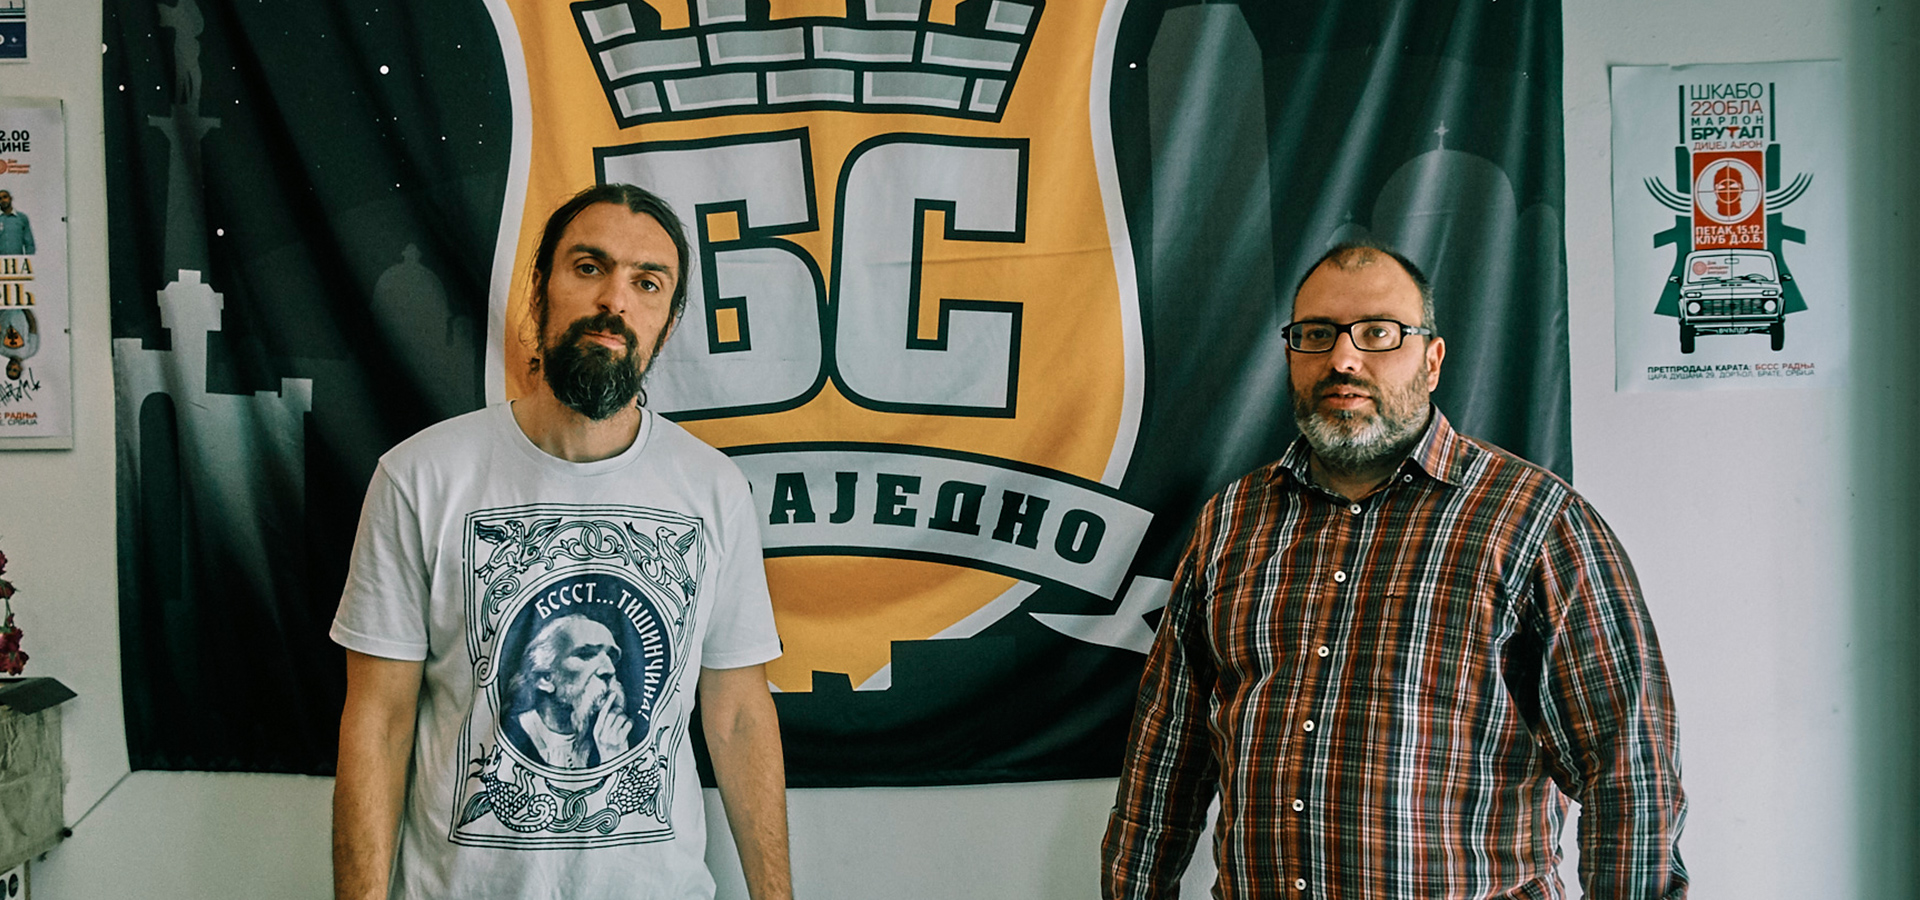 Fedja Dimovic and Bosko Cirkovic: To us, the streets of Belgrade are a metaphor for life